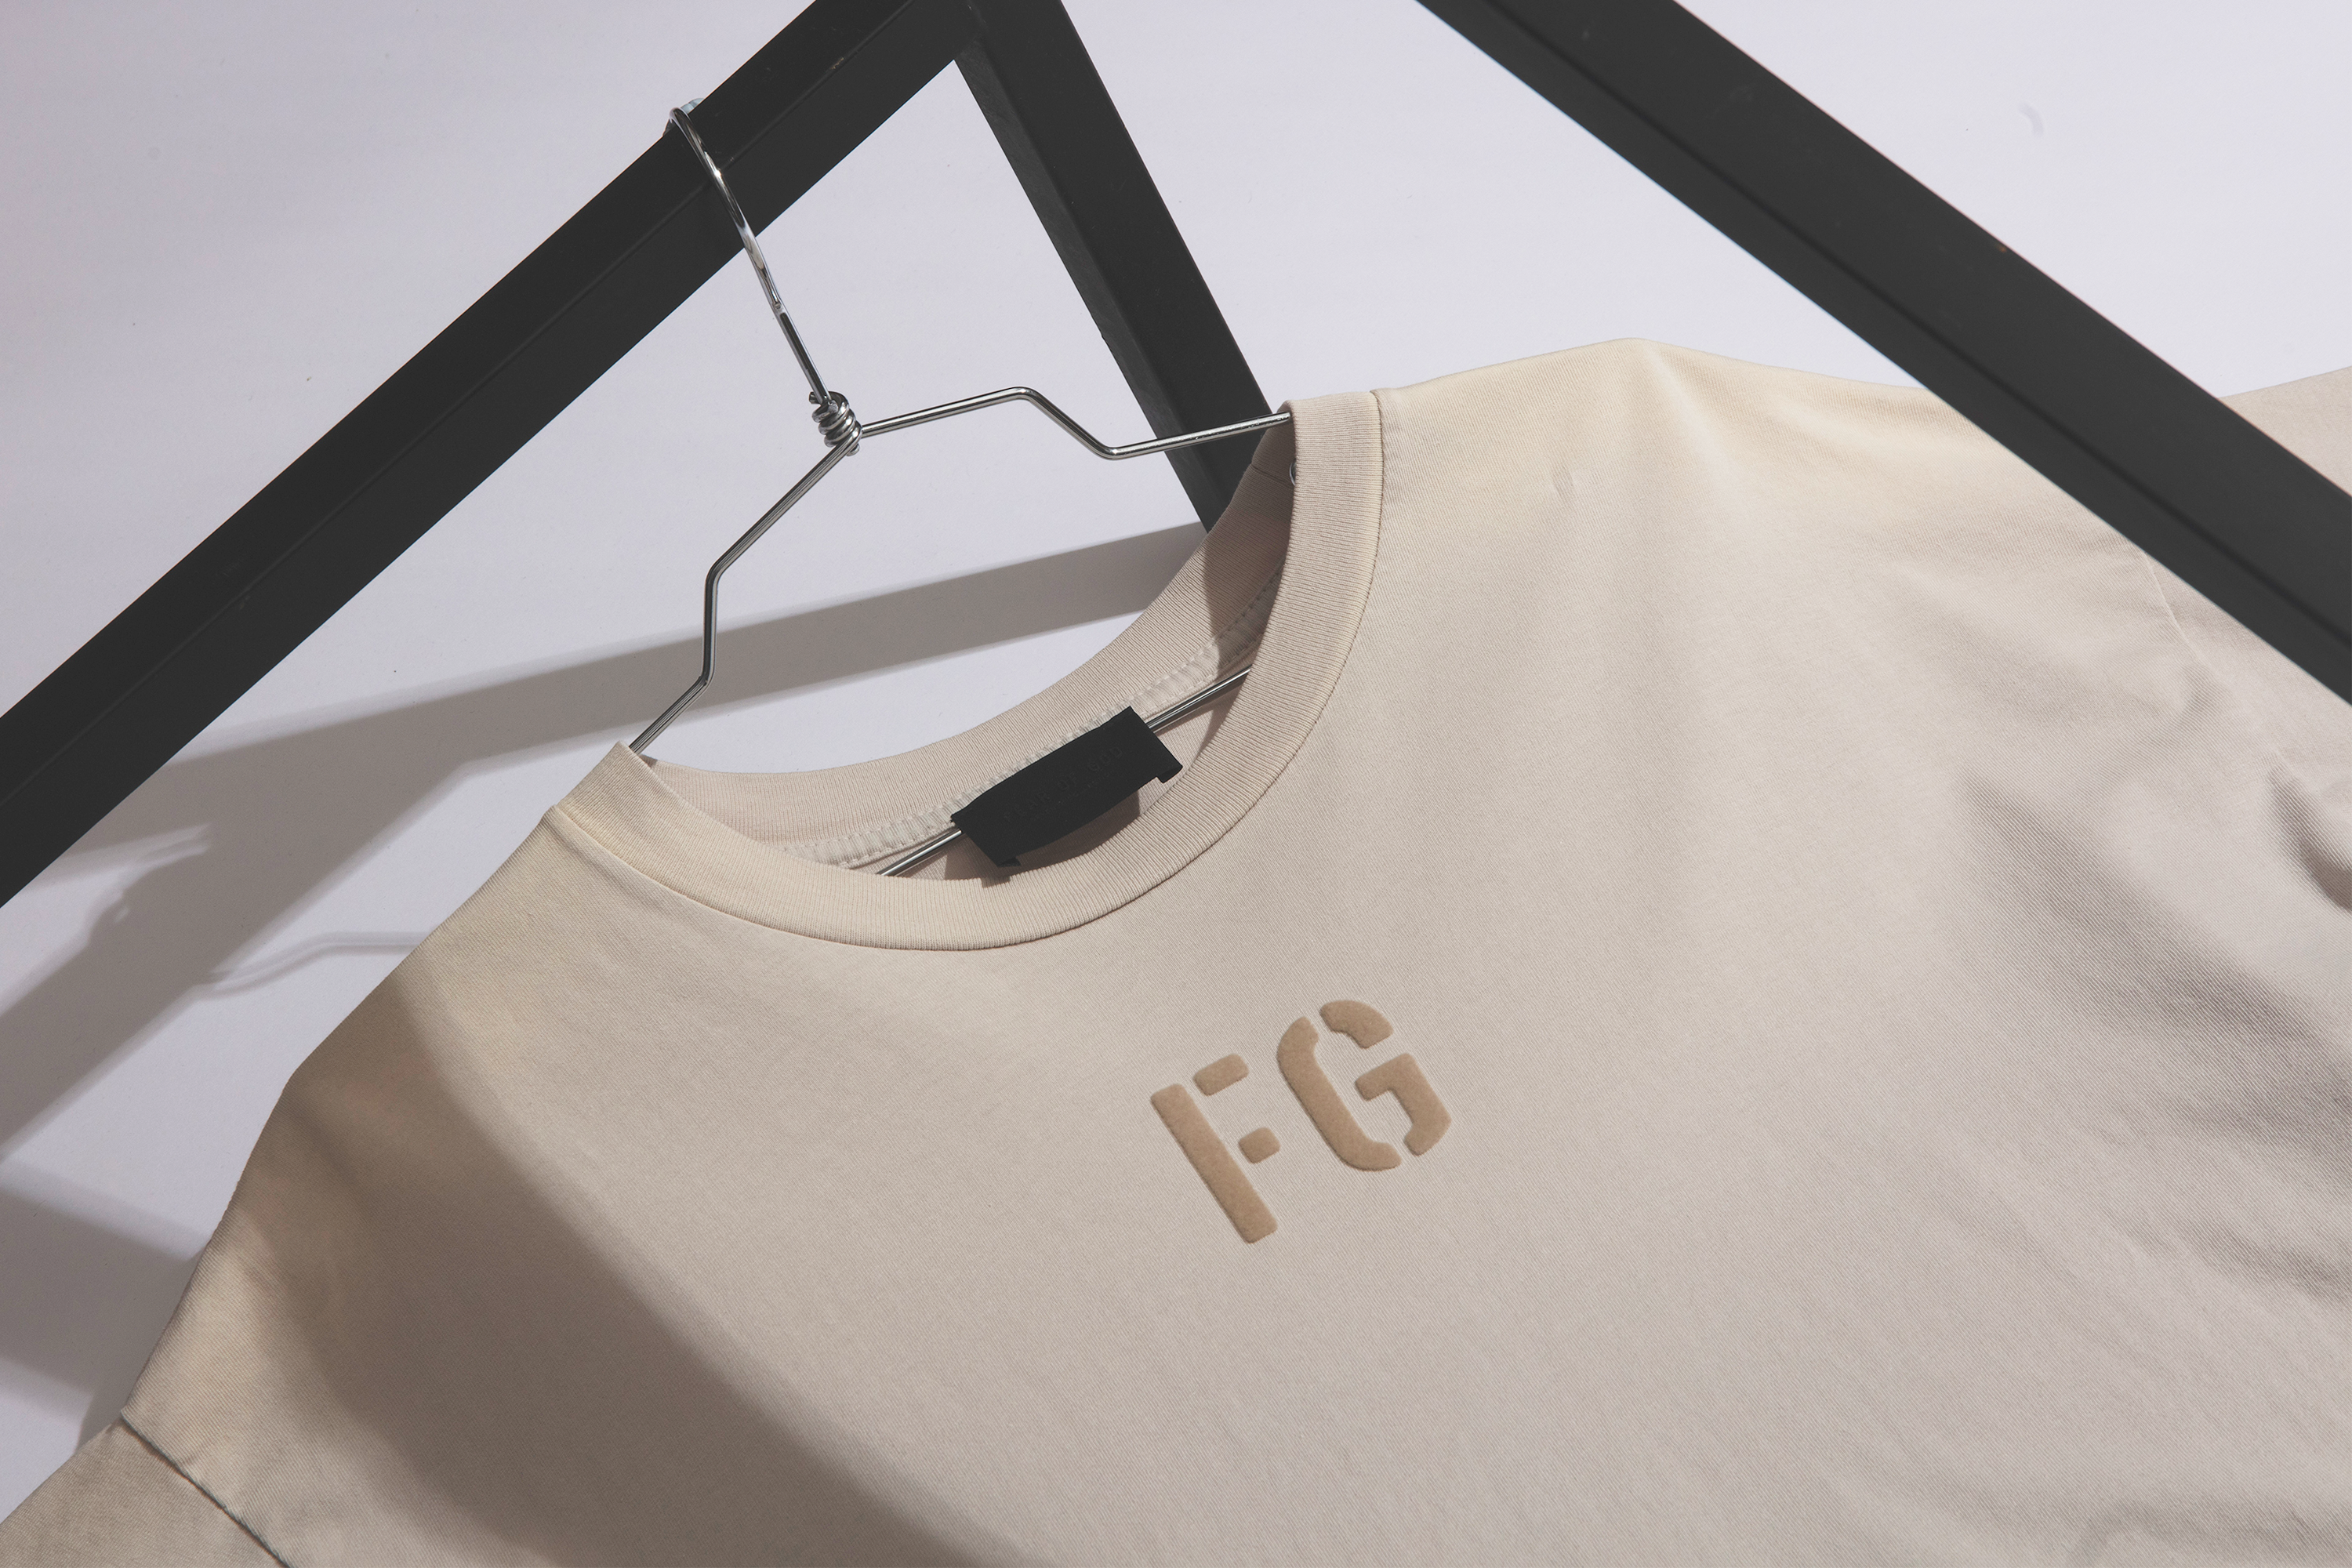 FIRST LOOK: Fear of God 